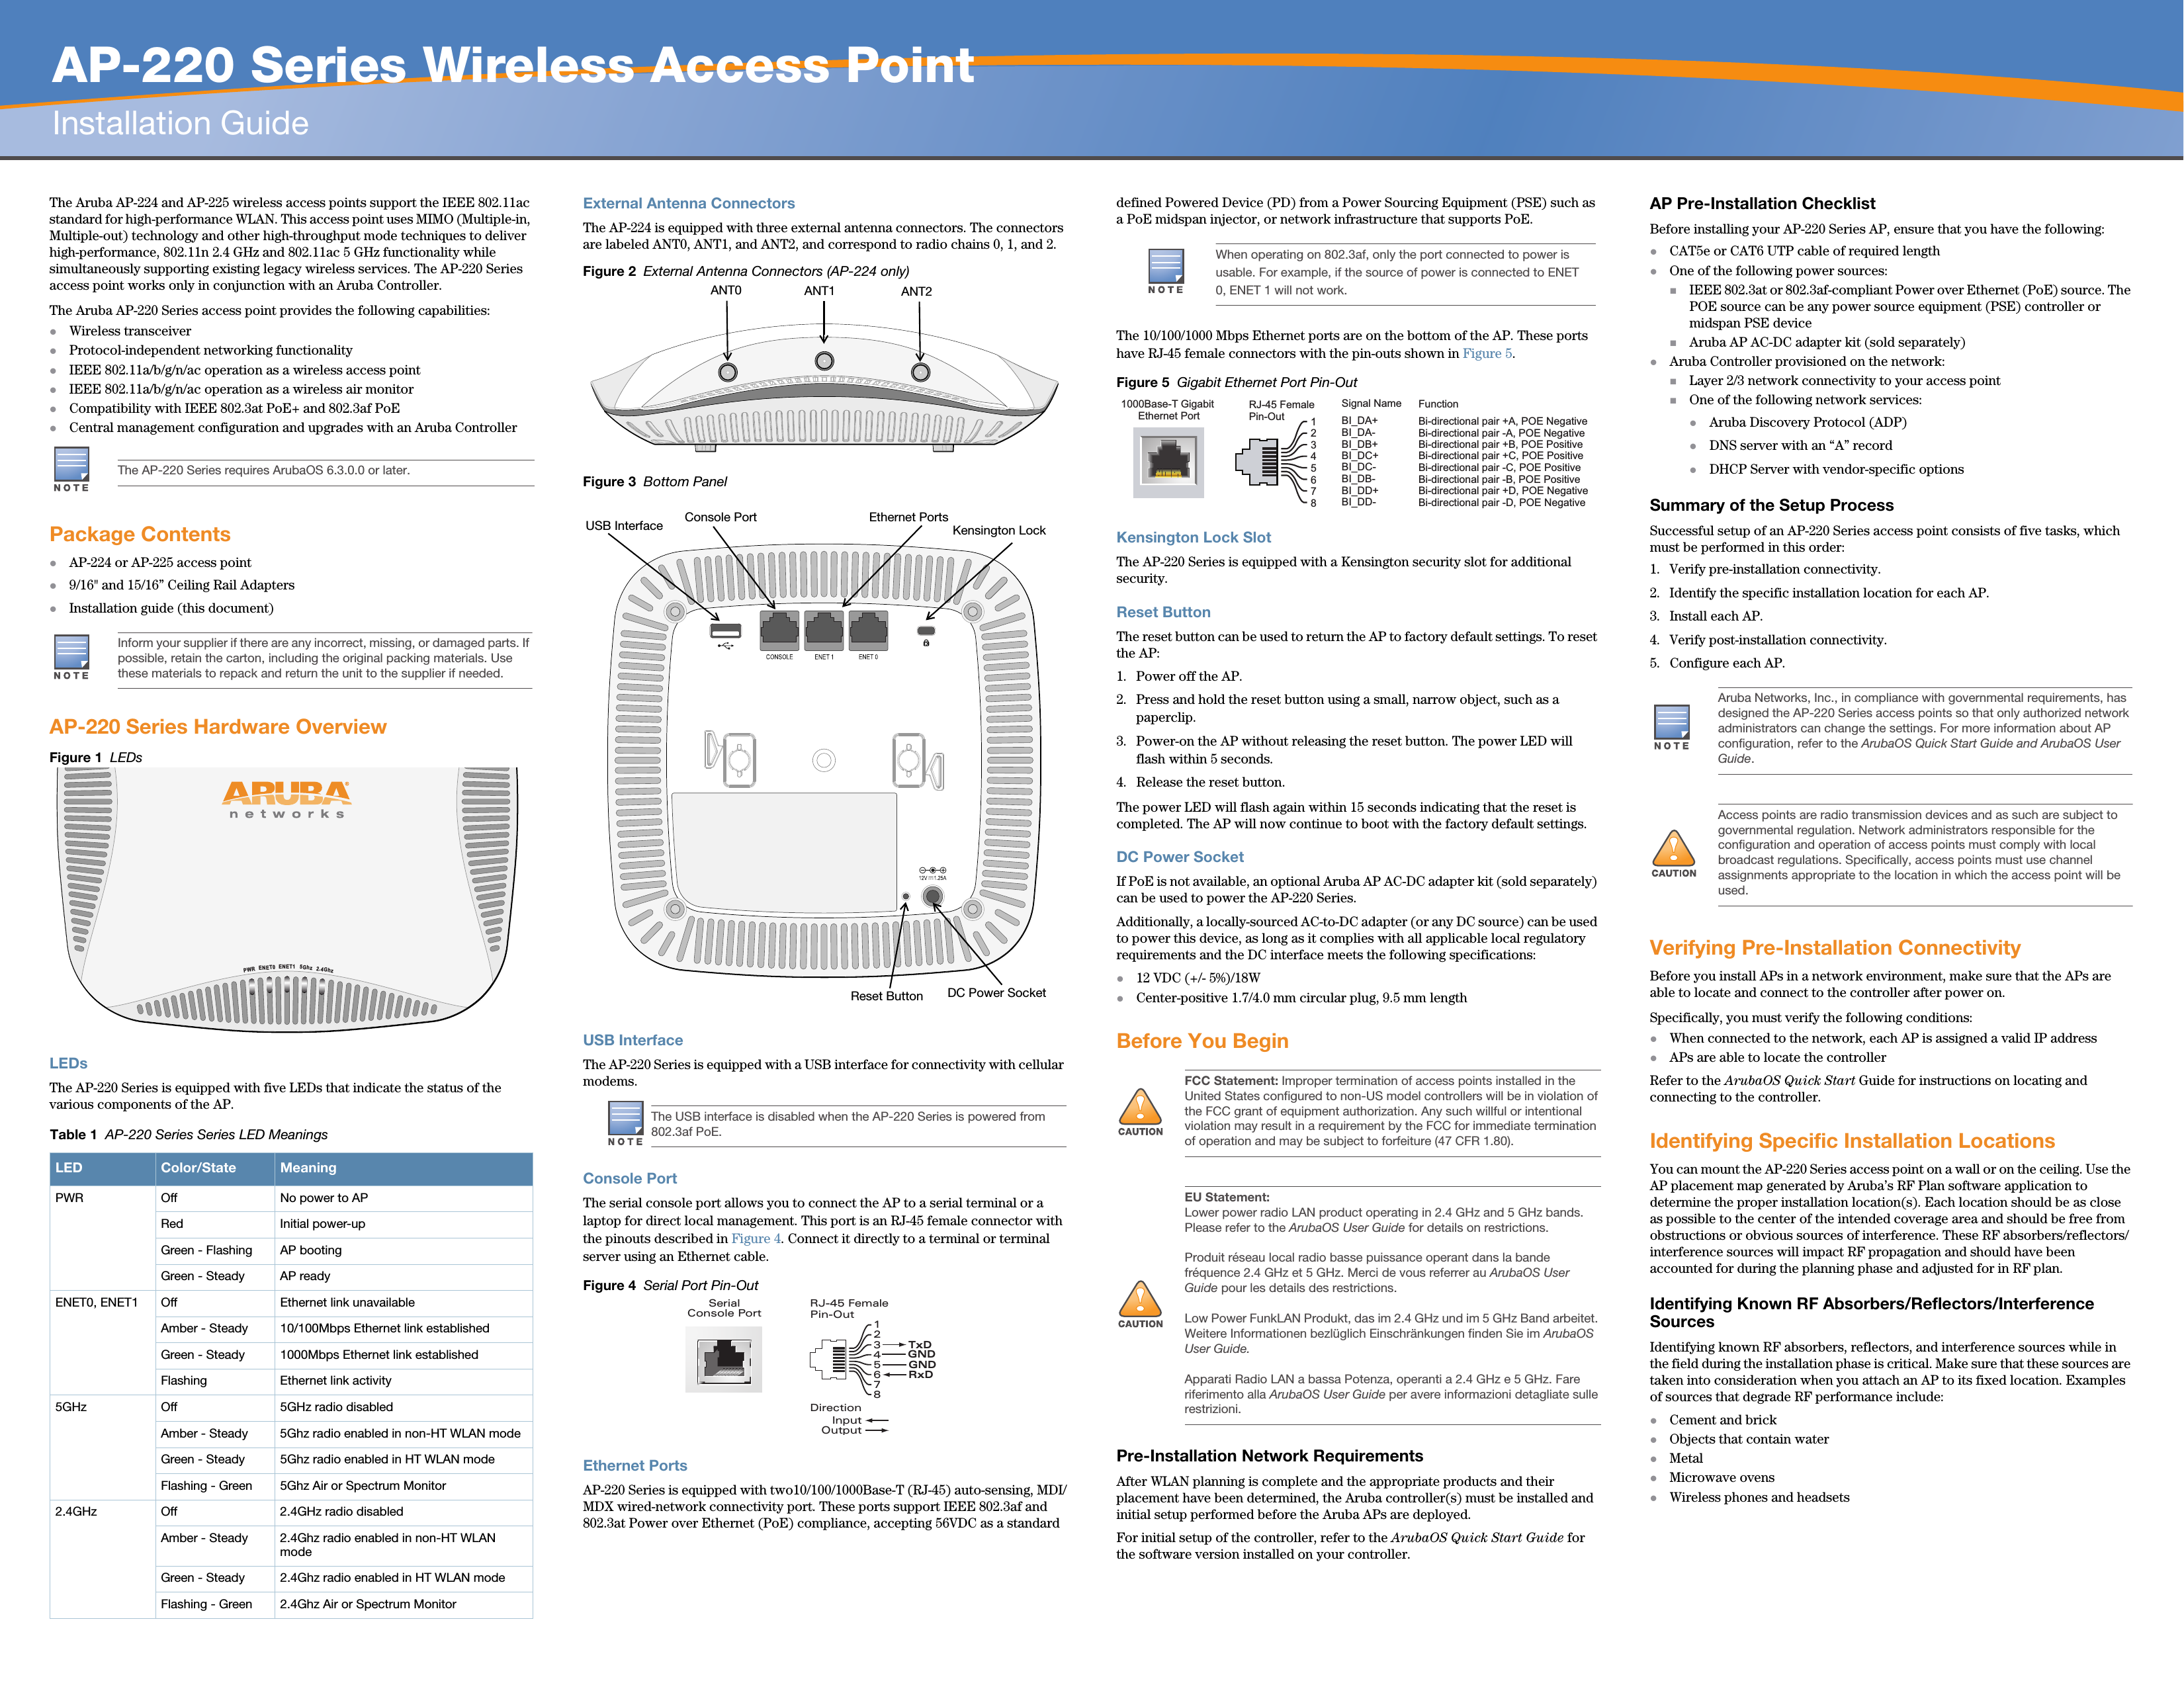   AP-220 Series Wireless Access PointInstallation GuideThe Aruba AP-224 and AP-225 wireless access points support the IEEE 802.11ac standard for high-performance WLAN. This access point uses MIMO (Multiple-in, Multiple-out) technology and other high-throughput mode techniques to deliver high-performance, 802.11n 2.4 GHz and 802.11ac 5 GHz functionality while simultaneously supporting existing legacy wireless services. The AP-220 Series access point works only in conjunction with an Aruba Controller.The Aruba AP-220 Series access point provides the following capabilities:Wireless transceiverProtocol-independent networking functionalityIEEE 802.11a/b/g/n/ac operation as a wireless access pointIEEE 802.11a/b/g/n/ac operation as a wireless air monitorCompatibility with IEEE 802.3at PoE+ and 802.3af PoE Central management configuration and upgrades with an Aruba ControllerPackage ContentsAP-224 or AP-225 access point 9/16&quot; and 15/16” Ceiling Rail AdaptersInstallation guide (this document)AP-220 Series Hardware OverviewFigure 1  LEDsLEDsThe AP-220 Series is equipped with five LEDs that indicate the status of the various components of the AP.External Antenna ConnectorsThe AP-224 is equipped with three external antenna connectors. The connectors are labeled ANT0, ANT1, and ANT2, and correspond to radio chains 0, 1, and 2. Figure 2  External Antenna Connectors (AP-224 only) Figure 3  Bottom Panel USB InterfaceThe AP-220 Series is equipped with a USB interface for connectivity with cellular modems. Console PortThe serial console port allows you to connect the AP to a serial terminal or a laptop for direct local management. This port is an RJ-45 female connector with the pinouts described in Figure 4. Connect it directly to a terminal or terminal server using an Ethernet cable.Figure 4  Serial Port Pin-OutEthernet PortsAP-220 Series is equipped with two10/100/1000Base-T (RJ-45) auto-sensing, MDI/MDX wired-network connectivity port. These ports support IEEE 802.3af and 802.3at Power over Ethernet (PoE) compliance, accepting 56VDC as a standard defined Powered Device (PD) from a Power Sourcing Equipment (PSE) such as a PoE midspan injector, or network infrastructure that supports PoE.The 10/100/1000 Mbps Ethernet ports are on the bottom of the AP. These ports have RJ-45 female connectors with the pin-outs shown in Figure 5. Figure 5  Gigabit Ethernet Port Pin-OutKensington Lock SlotThe AP-220 Series is equipped with a Kensington security slot for additional security. Reset ButtonThe reset button can be used to return the AP to factory default settings. To reset the AP:1. Power off the AP.2. Press and hold the reset button using a small, narrow object, such as a paperclip.3. Power-on the AP without releasing the reset button. The power LED will flash within 5 seconds.4. Release the reset button.The power LED will flash again within 15 seconds indicating that the reset is completed. The AP will now continue to boot with the factory default settings.DC Power SocketIf PoE is not available, an optional Aruba AP AC-DC adapter kit (sold separately) can be used to power the AP-220 Series. Additionally, a locally-sourced AC-to-DC adapter (or any DC source) can be used to power this device, as long as it complies with all applicable local regulatory requirements and the DC interface meets the following specifications:12 VDC (+/- 5%)/18WCenter-positive 1.7/4.0 mm circular plug, 9.5 mm lengthBefore You BeginPre-Installation Network RequirementsAfter WLAN planning is complete and the appropriate products and their placement have been determined, the Aruba controller(s) must be installed and initial setup performed before the Aruba APs are deployed.For initial setup of the controller, refer to the ArubaOS Quick Start Guide for the software version installed on your controller.AP Pre-Installation ChecklistBefore installing your AP-220 Series AP, ensure that you have the following:CAT5e or CAT6 UTP cable of required lengthOne of the following power sources:IEEE 802.3at or 802.3af-compliant Power over Ethernet (PoE) source. The POE source can be any power source equipment (PSE) controller or midspan PSE deviceAruba AP AC-DC adapter kit (sold separately)Aruba Controller provisioned on the network:Layer 2/3 network connectivity to your access pointOne of the following network services:Aruba Discovery Protocol (ADP)DNS server with an “A” recordDHCP Server with vendor-specific optionsSummary of the Setup ProcessSuccessful setup of an AP-220 Series access point consists of five tasks, which must be performed in this order:1. Verify pre-installation connectivity.2. Identify the specific installation location for each AP.3. Install each AP.4. Verify post-installation connectivity.5. Configure each AP.Verifying Pre-Installation ConnectivityBefore you install APs in a network environment, make sure that the APs are able to locate and connect to the controller after power on.Specifically, you must verify the following conditions:When connected to the network, each AP is assigned a valid IP addressAPs are able to locate the controller Refer to the ArubaOS Quick Start Guide for instructions on locating and connecting to the controller.Identifying Specific Installation LocationsYou can mount the AP-220 Series access point on a wall or on the ceiling. Use the AP placement map generated by Aruba’s RF Plan software application to determine the proper installation location(s). Each location should be as close as possible to the center of the intended coverage area and should be free from obstructions or obvious sources of interference. These RF absorbers/reflectors/interference sources will impact RF propagation and should have been accounted for during the planning phase and adjusted for in RF plan.Identifying Known RF Absorbers/Reflectors/Interference SourcesIdentifying known RF absorbers, reflectors, and interference sources while in the field during the installation phase is critical. Make sure that these sources are taken into consideration when you attach an AP to its fixed location. Examples of sources that degrade RF performance include:Cement and brickObjects that contain waterMetalMicrowave ovensWireless phones and headsetsThe AP-220 Series requires ArubaOS 6.3.0.0 or later.Inform your supplier if there are any incorrect, missing, or damaged parts. If possible, retain the carton, including the original packing materials. Use these materials to repack and return the unit to the supplier if needed.Table 1  AP-220 Series Series LED MeaningsLED Color/State MeaningPWR Off No power to APRed Initial power-up Green - Flashing AP bootingGreen - Steady AP readyENET0, ENET1 Off Ethernet link unavailableAmber - Steady 10/100Mbps Ethernet link establishedGreen - Steady 1000Mbps Ethernet link establishedFlashing Ethernet link activity5GHz Off 5GHz radio disabledAmber - Steady 5Ghz radio enabled in non-HT WLAN modeGreen - Steady 5Ghz radio enabled in HT WLAN modeFlashing - Green  5Ghz Air or Spectrum Monitor2.4GHz Off 2.4GHz radio disabledAmber - Steady 2.4Ghz radio enabled in non-HT WLAN modeGreen - Steady 2.4Ghz radio enabled in HT WLAN modeFlashing - Green  2.4Ghz Air or Spectrum Monitor2.4Ghz5GhzENET1ENET0PWRThe USB interface is disabled when the AP-220 Series is powered from 802.3af PoE.ANT0 ANT2ANT1Kensington LockUSB Interface Console Port Ethernet PortsDC Power SocketReset ButtonSerialConsole Port12345678TxDGNDRxDRJ-45 FemalePin-OutDirectionInputOutputGNDWhen operating on 802.3af, only the port connected to power is usable. For example, if the source of power is connected to ENET 0, ENET 1 will not work.!FCC Statement: Improper termination of access points installed in the United States configured to non-US model controllers will be in violation of the FCC grant of equipment authorization. Any such willful or intentional violation may result in a requirement by the FCC for immediate termination of operation and may be subject to forfeiture (47 CFR 1.80).!EU Statement: Lower power radio LAN product operating in 2.4 GHz and 5 GHz bands. Please refer to the ArubaOS User Guide for details on restrictions.Produit réseau local radio basse puissance operant dans la bande fréquence 2.4 GHz et 5 GHz. Merci de vous referrer au ArubaOS User Guide pour les details des restrictions.Low Power FunkLAN Produkt, das im 2.4 GHz und im 5 GHz Band arbeitet. Weitere Informationen bezlüglich Einschränkungen finden Sie im ArubaOS User Guide.Apparati Radio LAN a bassa Potenza, operanti a 2.4 GHz e 5 GHz. Fare riferimento alla ArubaOS User Guide per avere informazioni detagliate sulle restrizioni.1000Base-T Gigabit Ethernet PortRJ-45 FemalePin-OutSignal Name12345678BI_DC+BI_DC-BI_DD+BI_DD-BI_DA+BI_DA-BI_DB+BI_DB-FunctionBi-directional pair +C, POE PositiveBi-directional pair -C, POE PositiveBi-directional pair +D, POE NegativeBi-directional pair -D, POE NegativeBi-directional pair +A, POE NegativeBi-directional pair -A, POE NegativeBi-directional pair +B, POE PositiveBi-directional pair -B, POE Positive   Aruba Networks, Inc., in compliance with governmental requirements, has designed the AP-220 Series access points so that only authorized network administrators can change the settings. For more information about AP configuration, refer to the ArubaOS Quick Start Guide and ArubaOS User Guide.!Access points are radio transmission devices and as such are subject to governmental regulation. Network administrators responsible for the configuration and operation of access points must comply with local broadcast regulations. Specifically, access points must use channel assignments appropriate to the location in which the access point will be used.